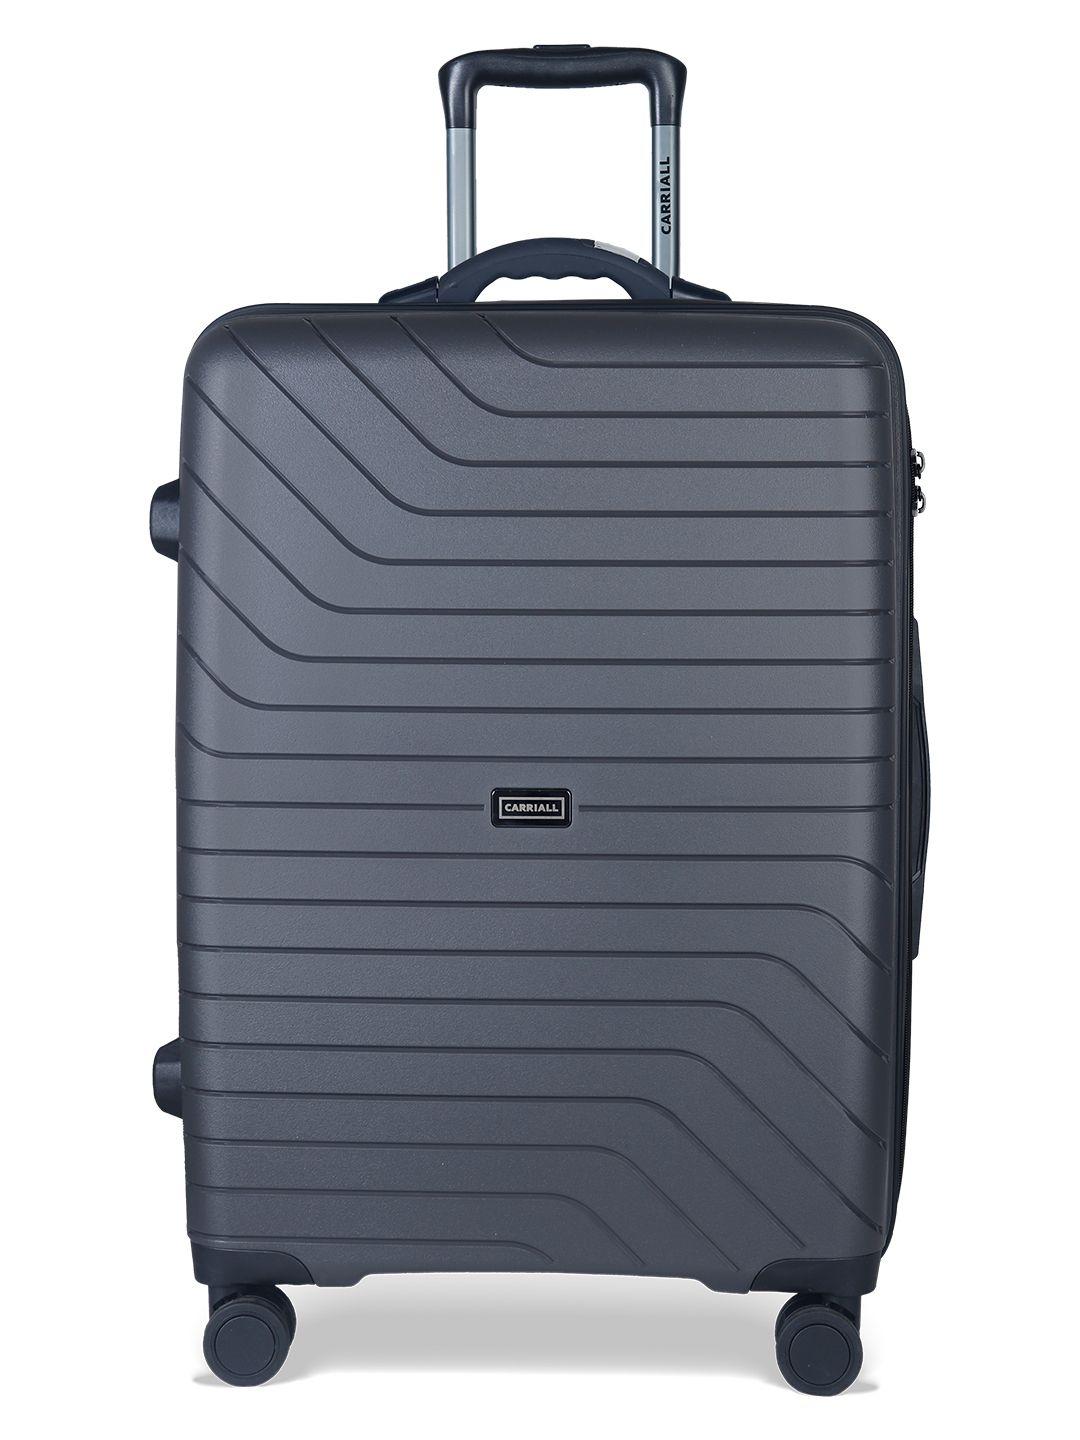 carriall smart check-in trolley luggage bag with inbuilt weighing scale & tsa lock